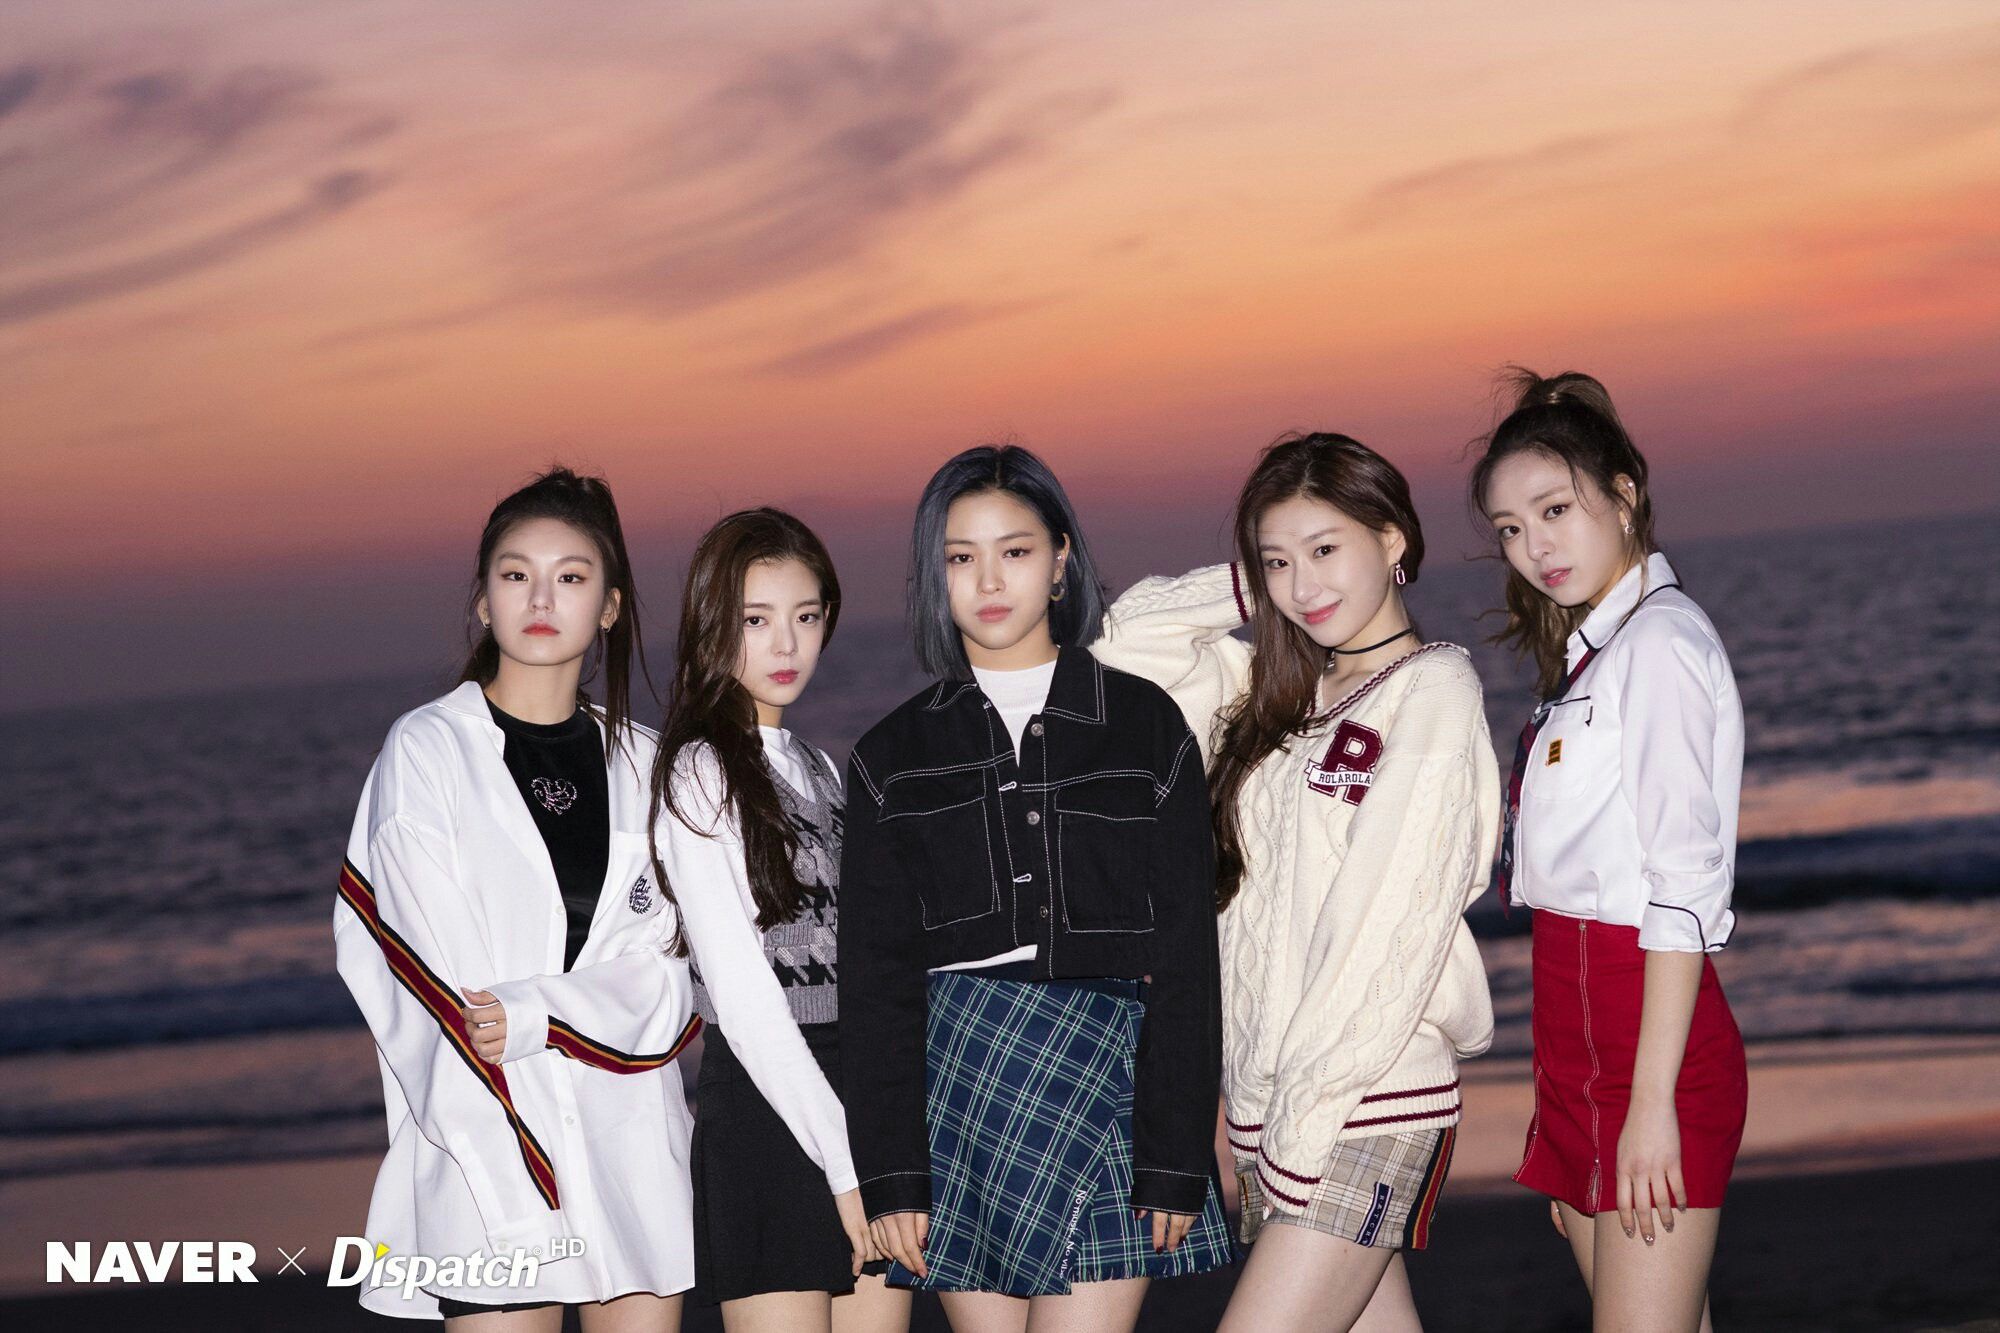 itzy-announce-surprise-comeback-with-new-album-guess-who-slated-for-april-30